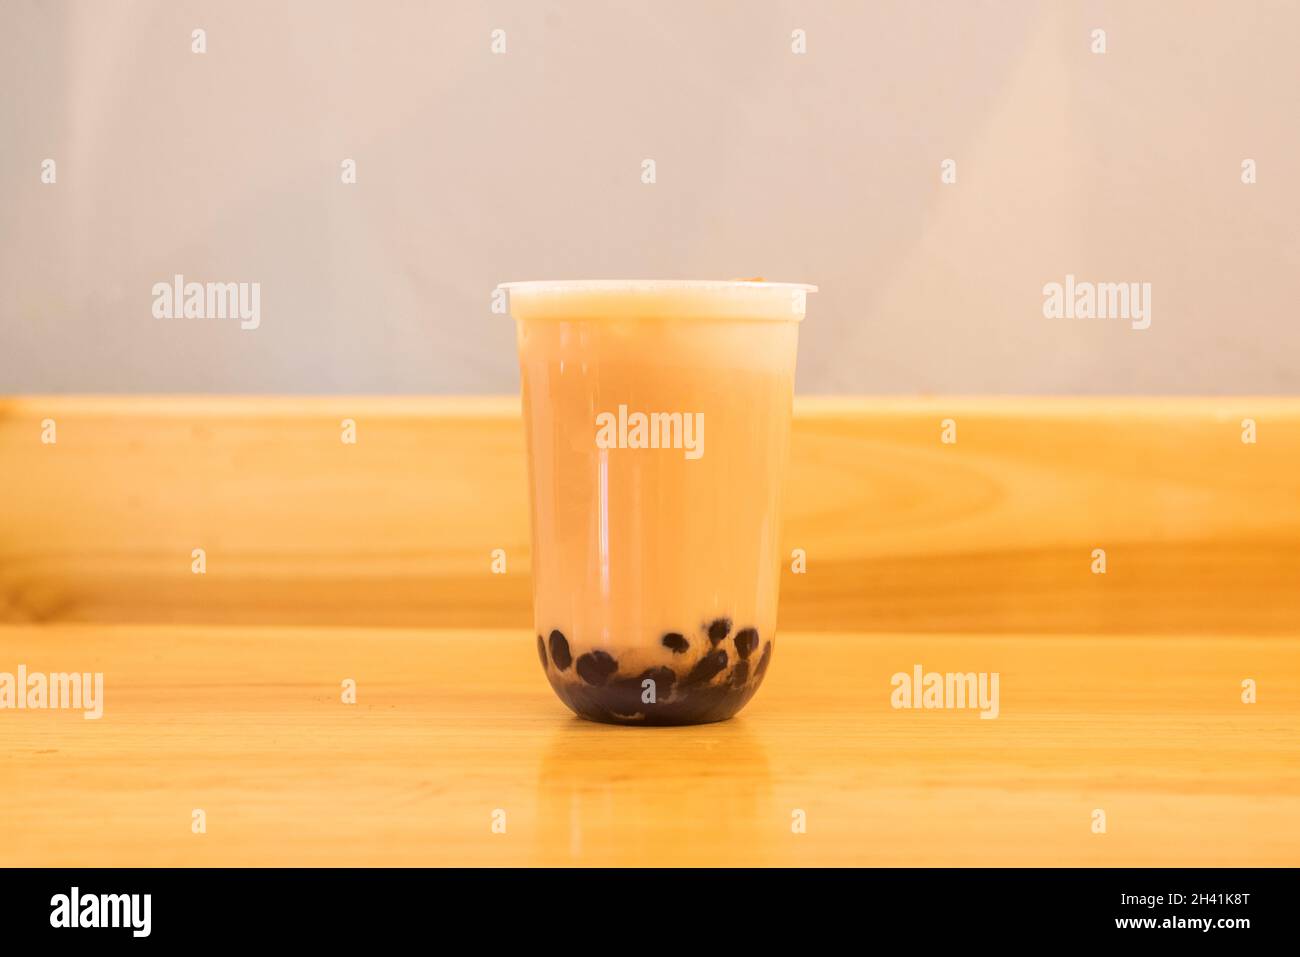 https://c8.alamy.com/comp/2H41K8T/oolong-tea-with-bubbles-or-pearls-also-known-for-its-bubble-tea-in-english-or-also-as-boba-is-a-sweet-flavored-tea-drink-invented-in-taiwan-2H41K8T.jpg